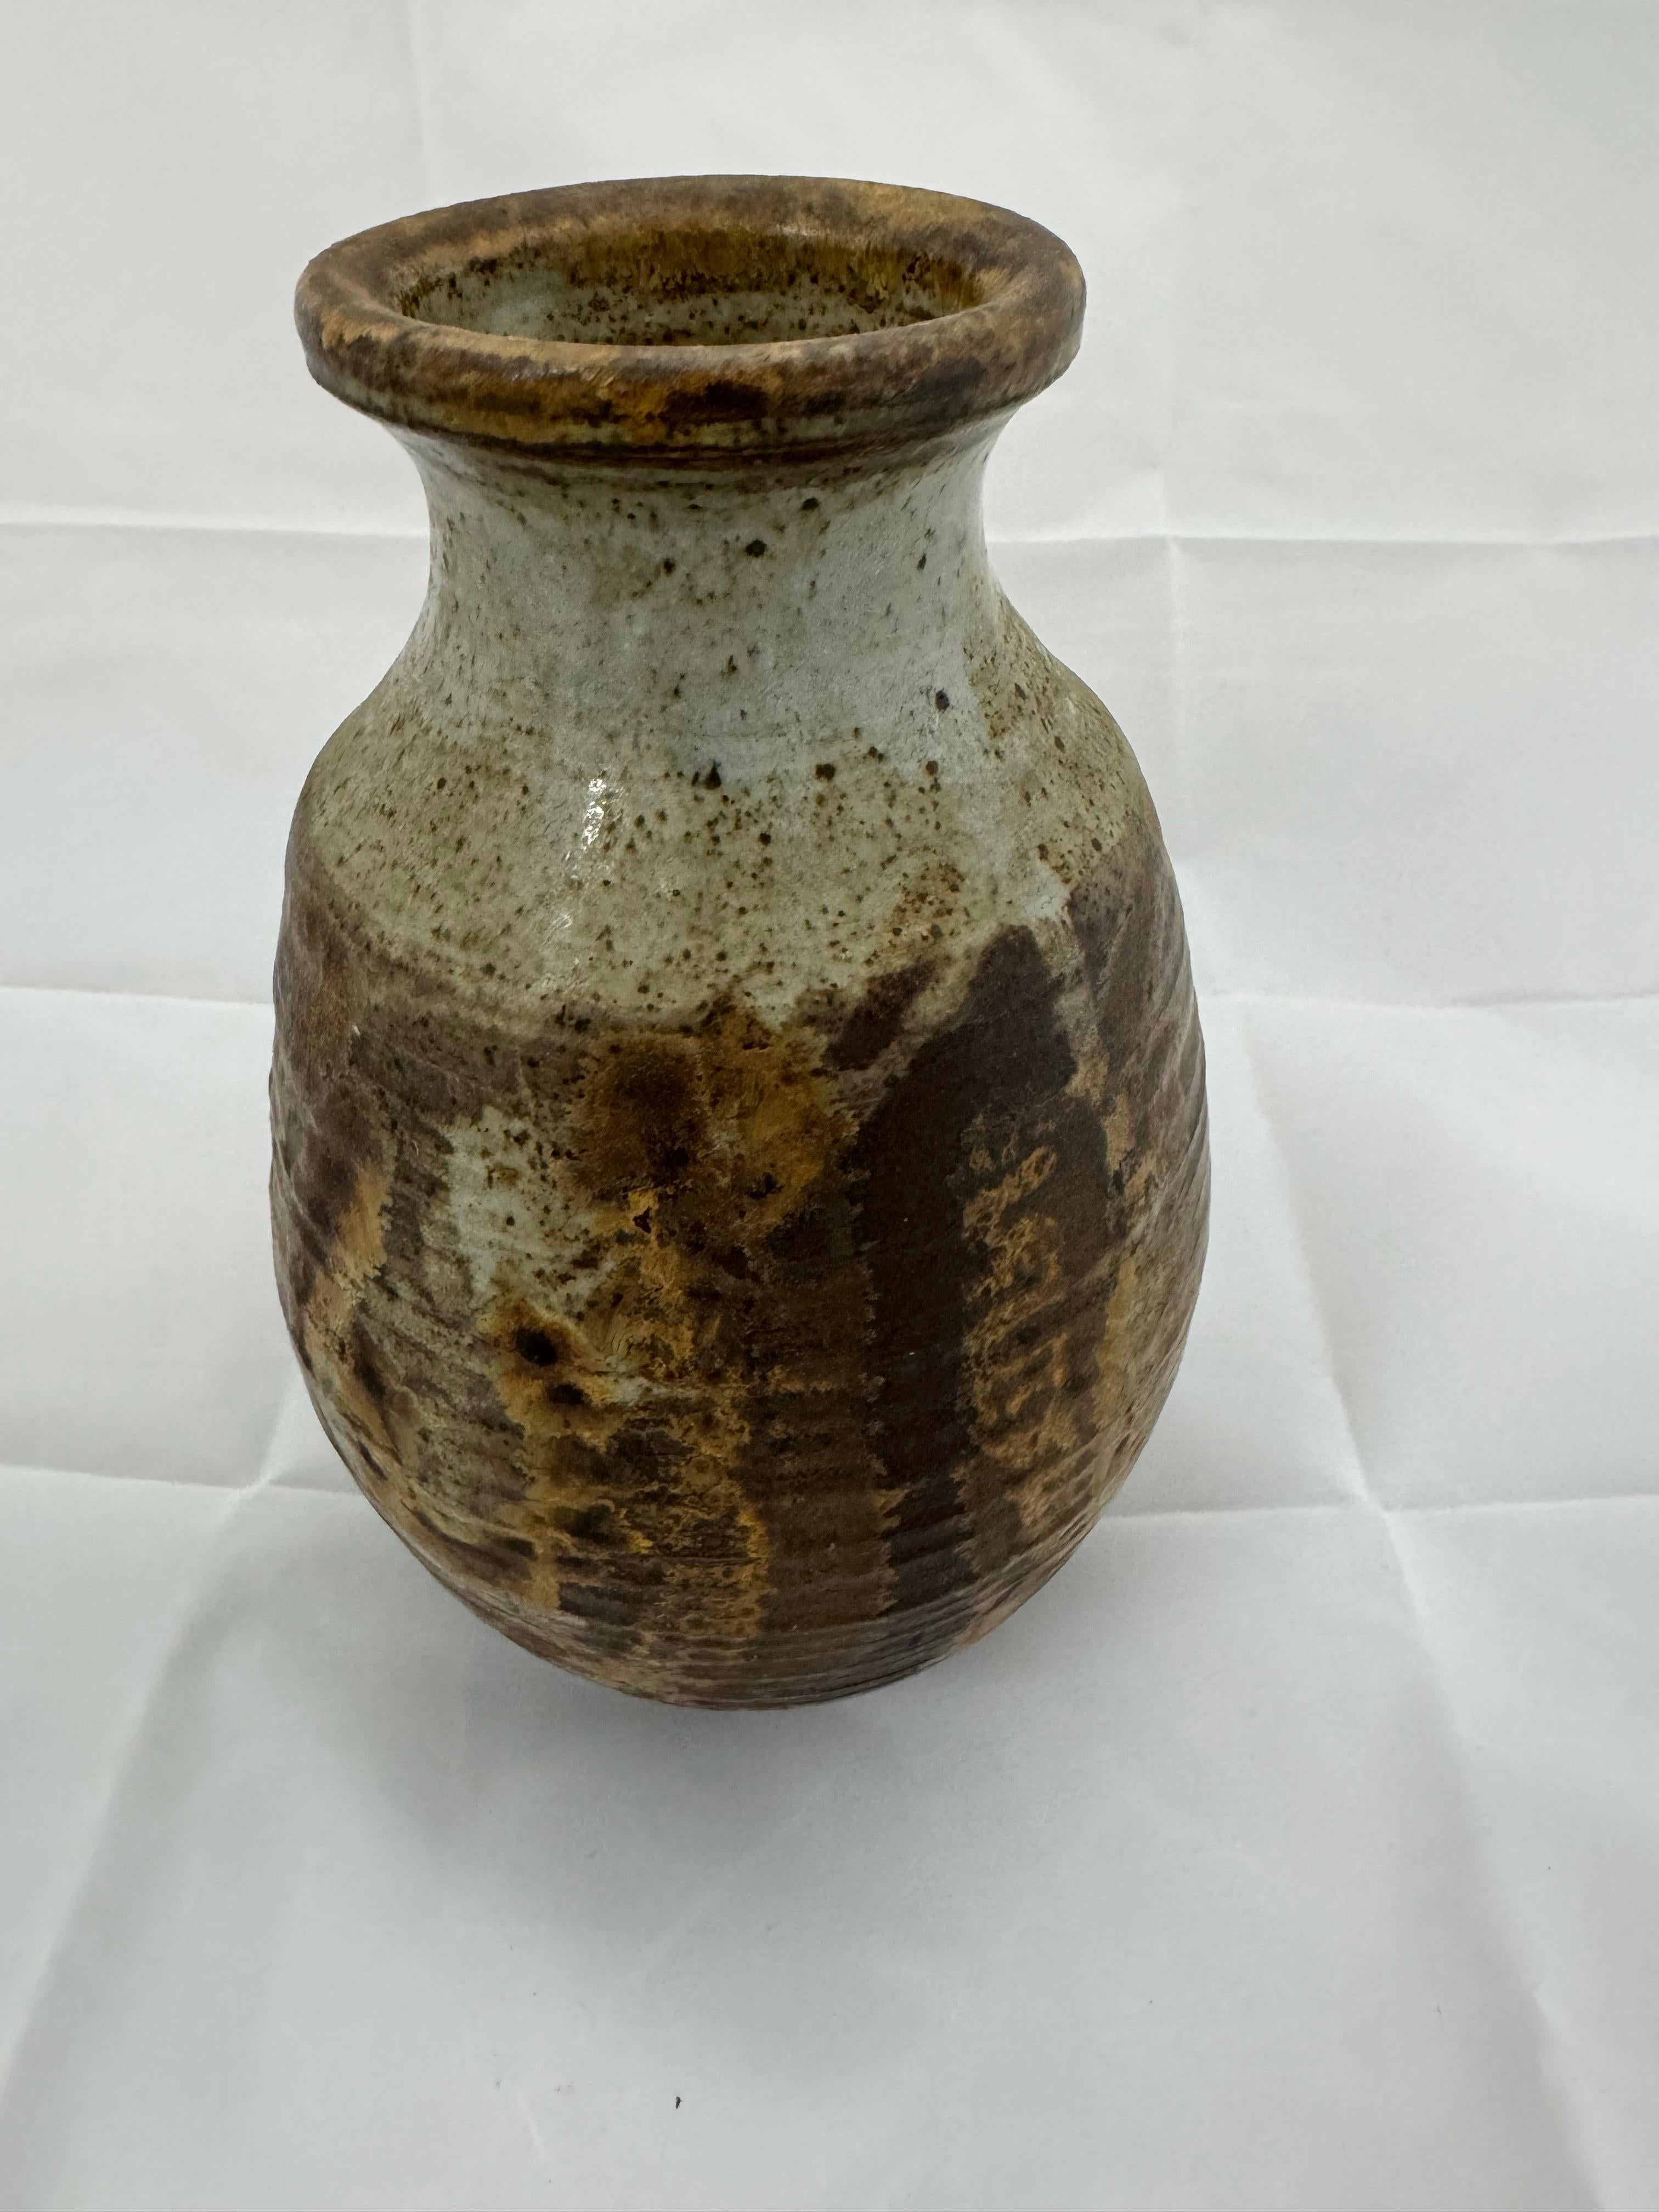 Nice pottery vase for your collection